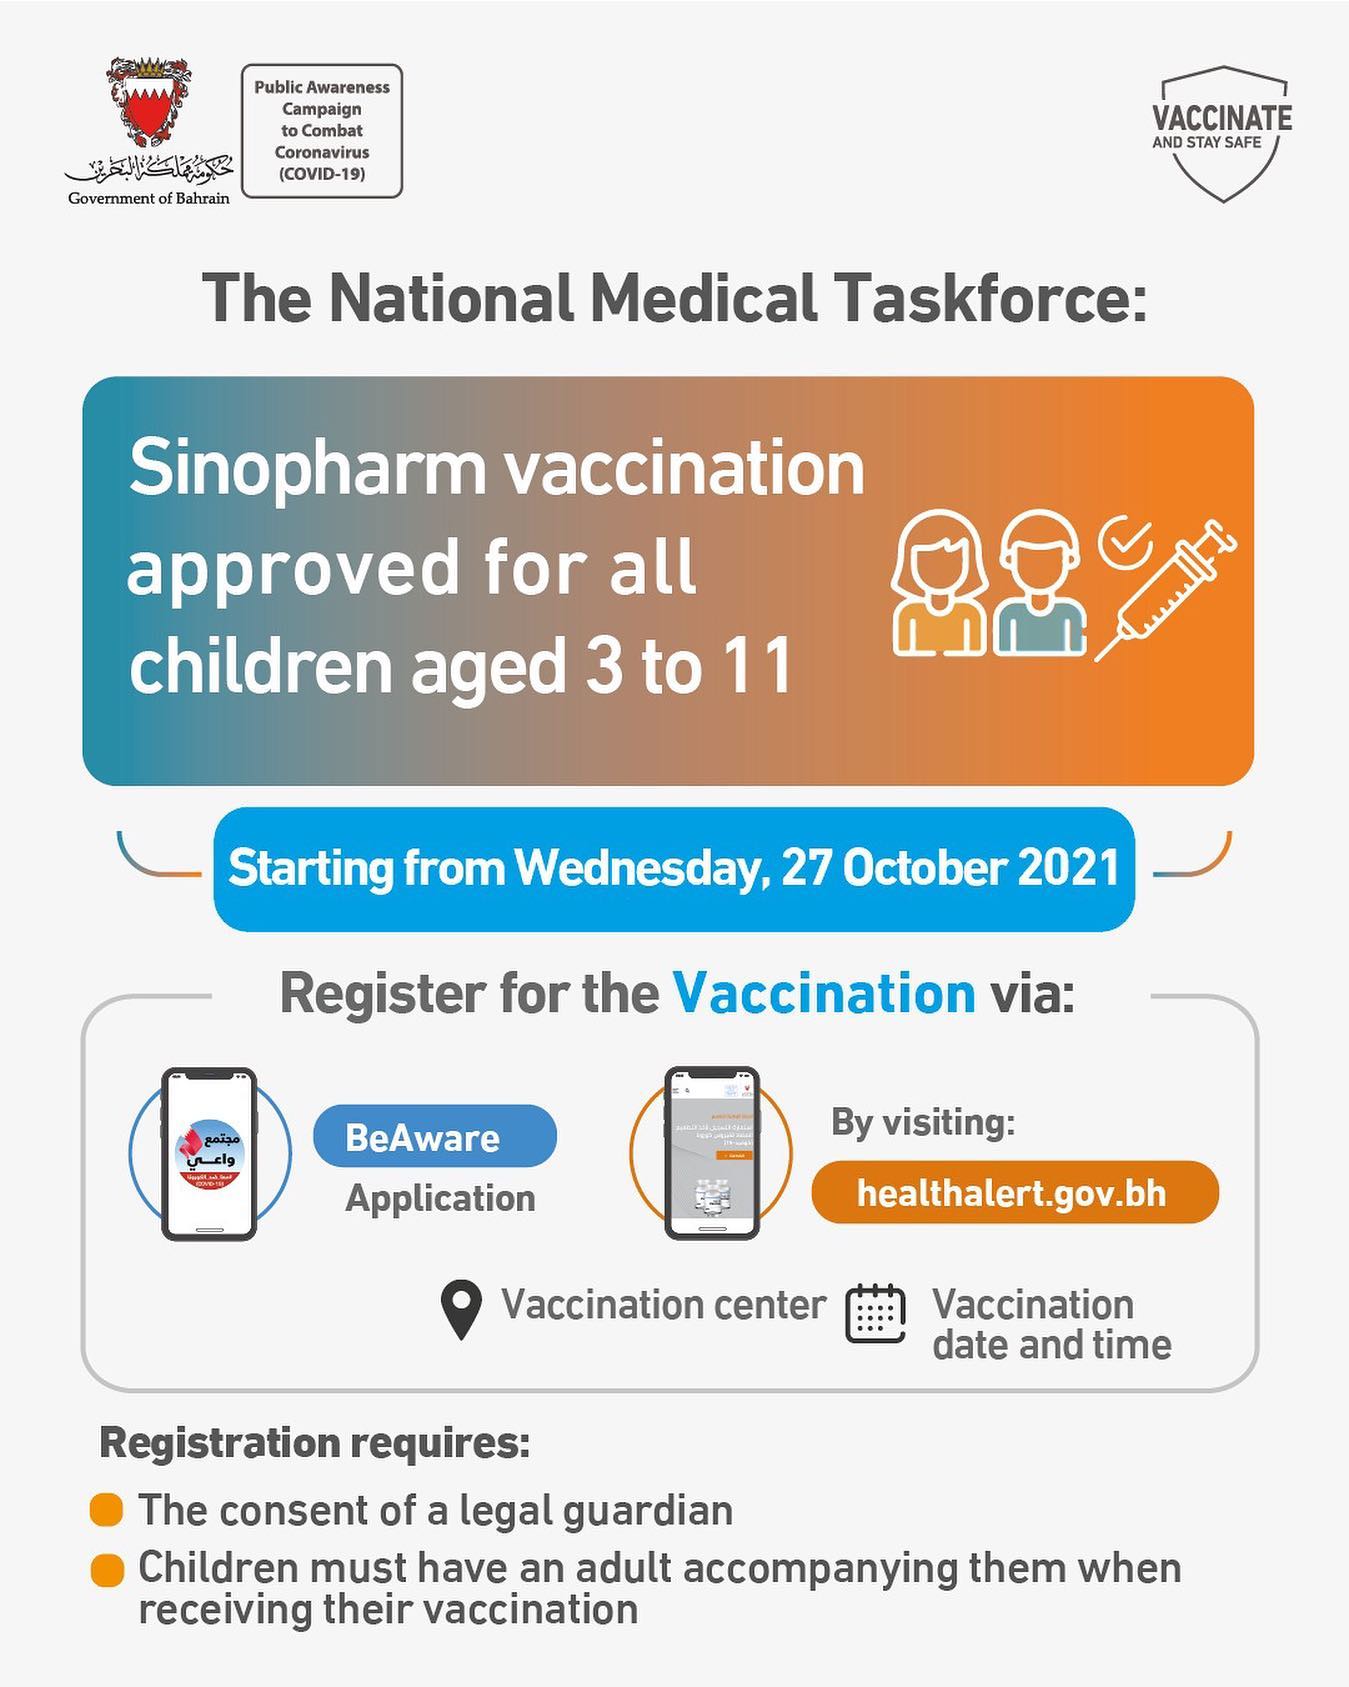 Sinopharm vaccine approved for all children aged 3 to 11